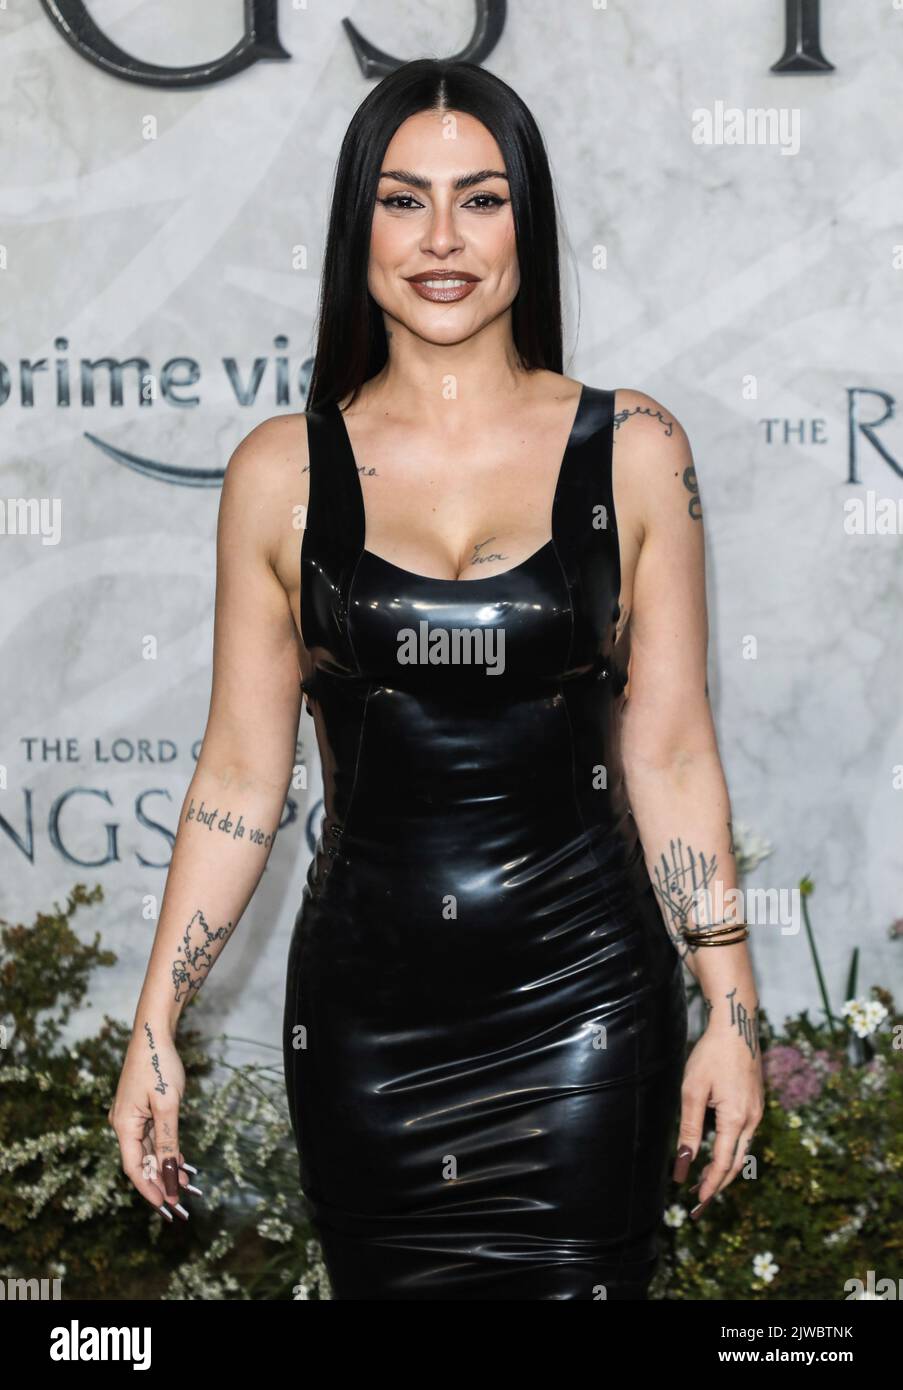 London, UK. 30th Aug, 2022. Cleo Pires seen attending the Global Premiere For 'The Lord Of The Rings: The Rings Of Power' at Leicester Square Gardens in London. Credit: SOPA Images Limited/Alamy Live News Stock Photo